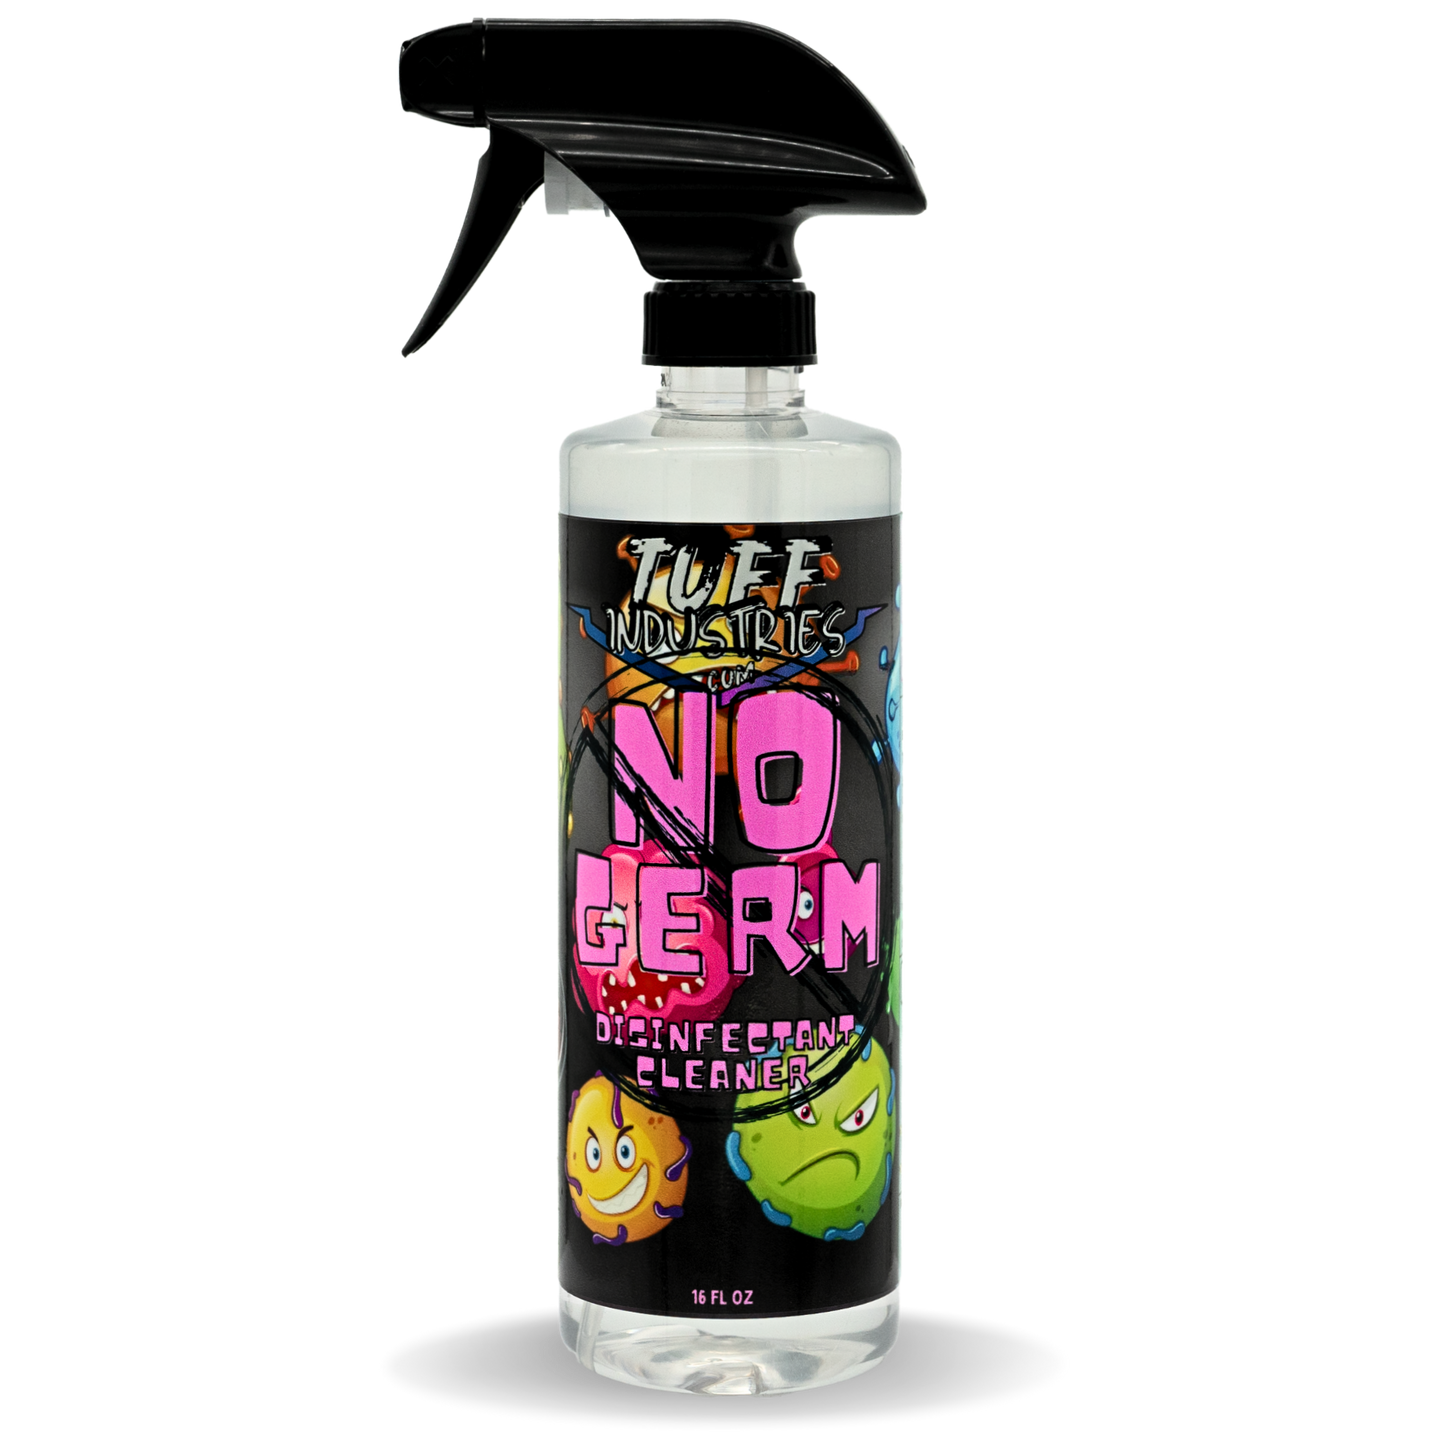 No Germ - Disinfectant Cleaner Spray